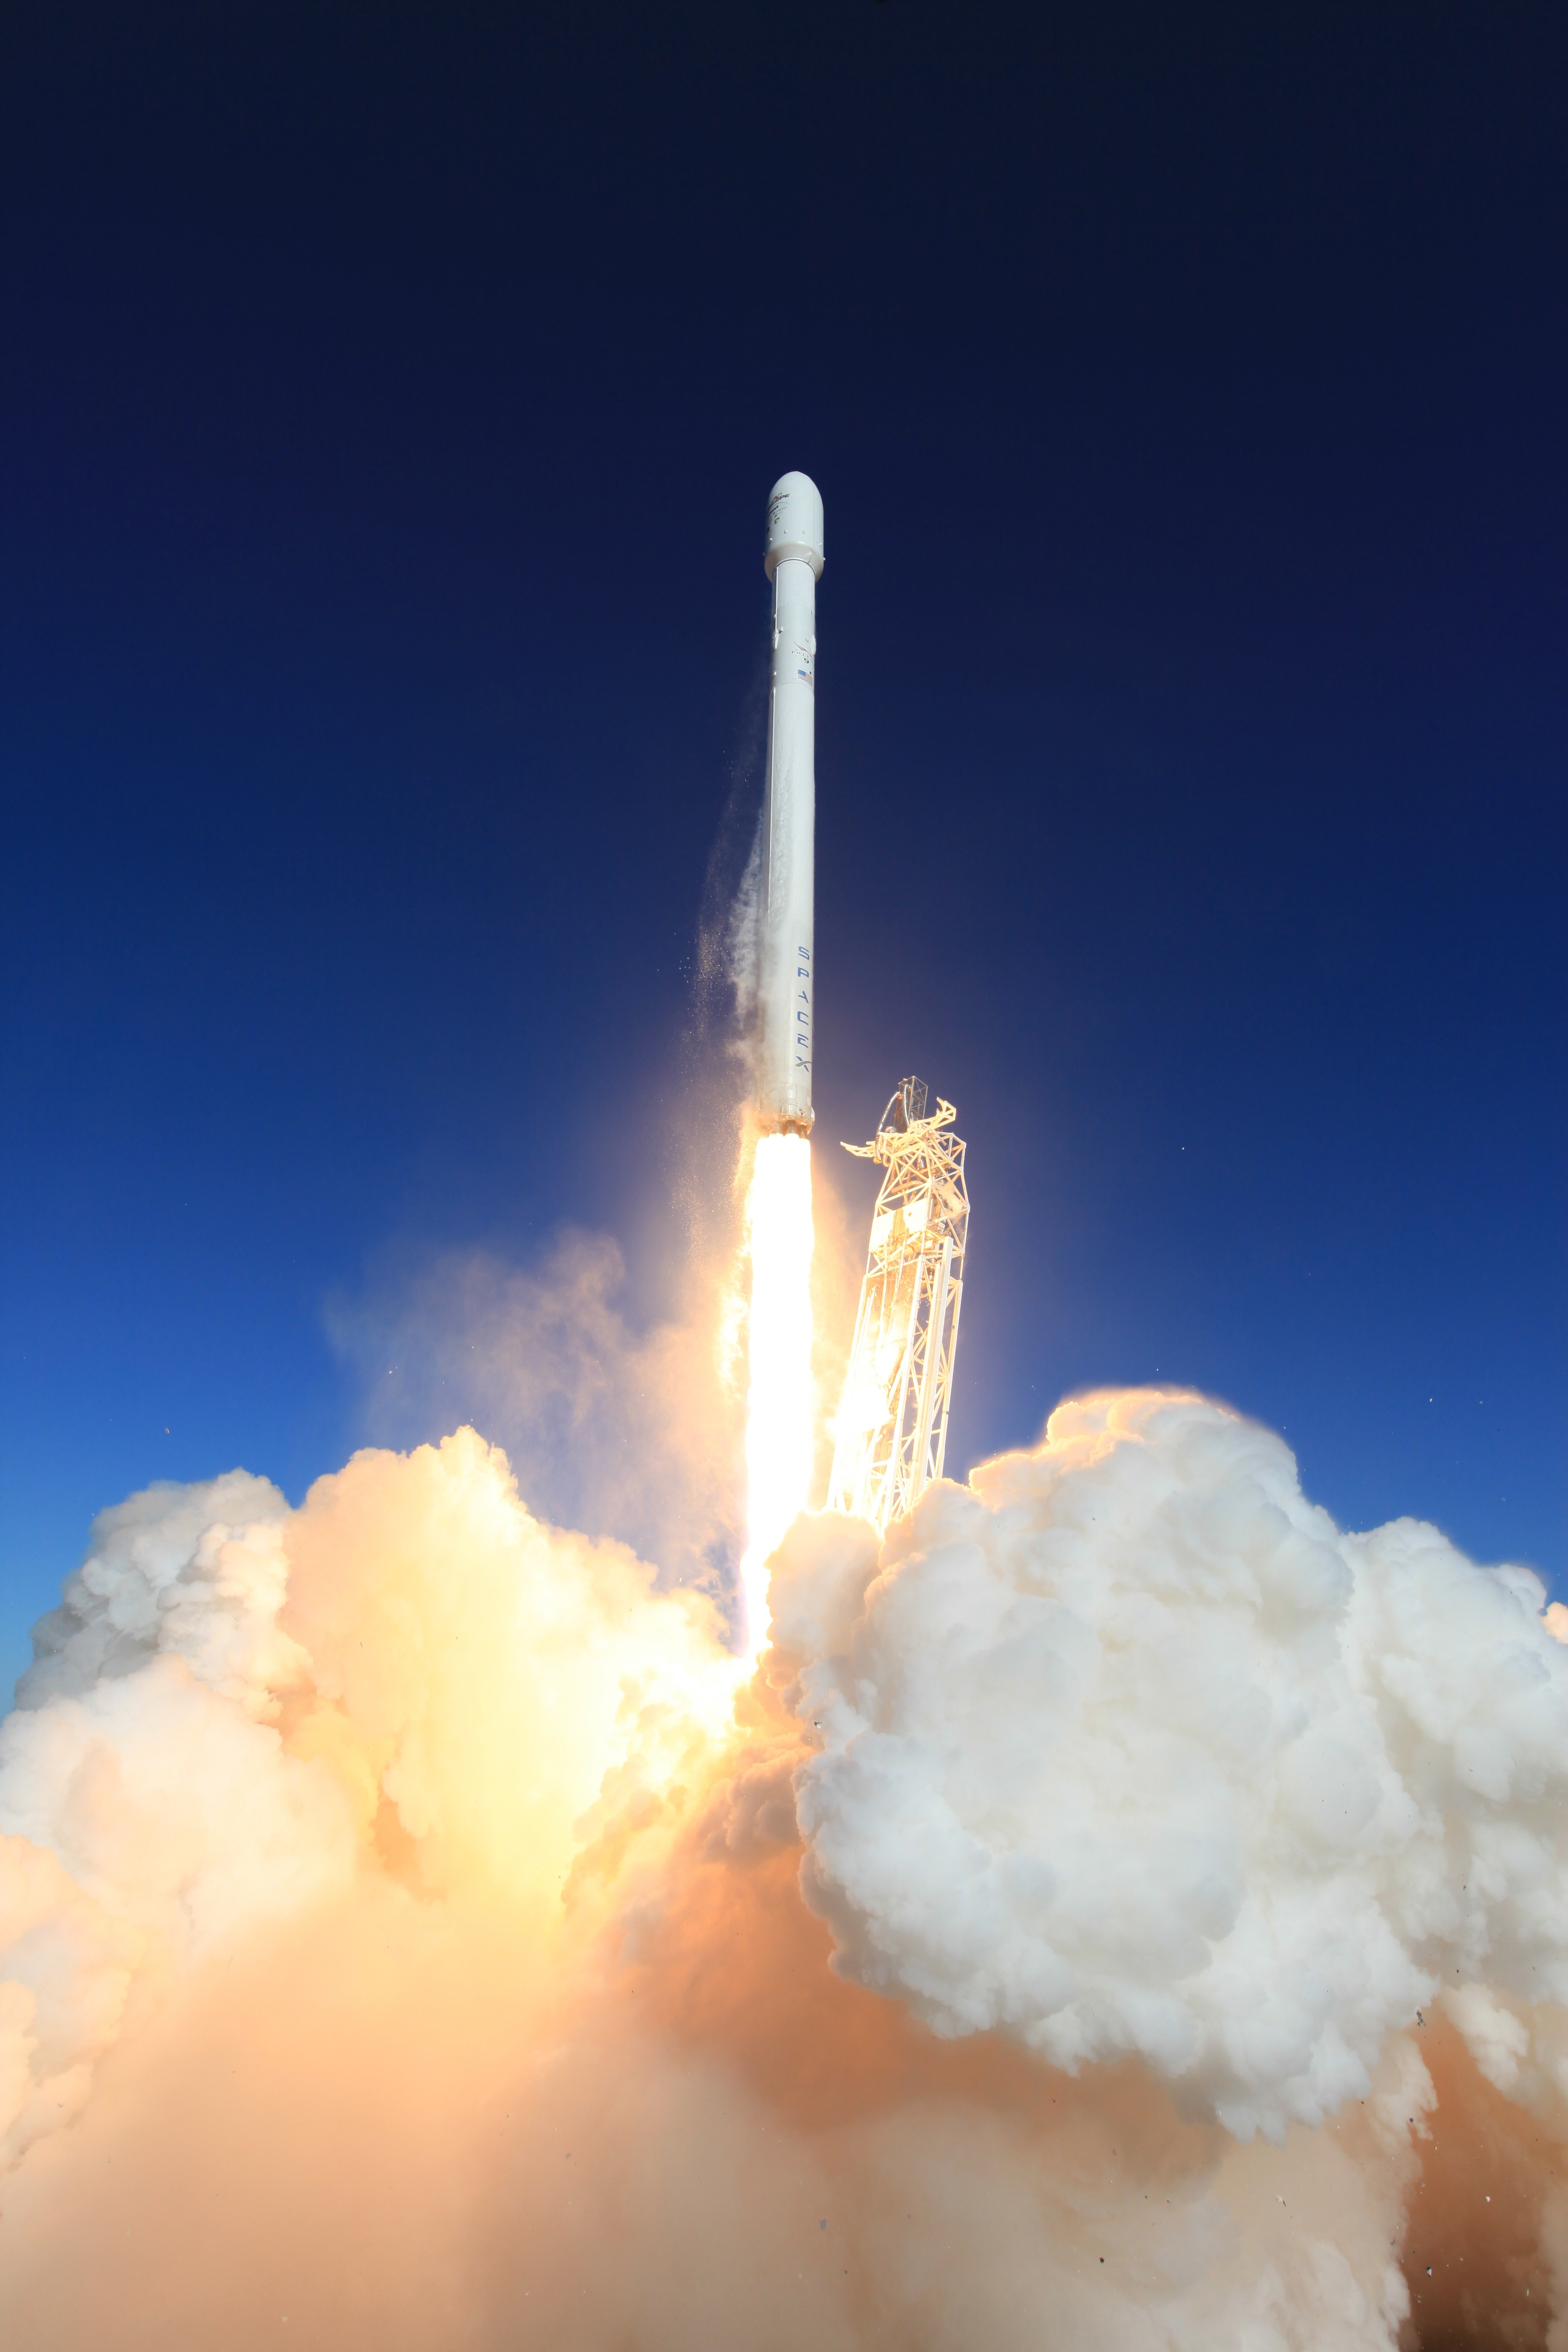 Lift-Off, Spacex, Rocket Launch, Launch, smoke - physical structure, no people